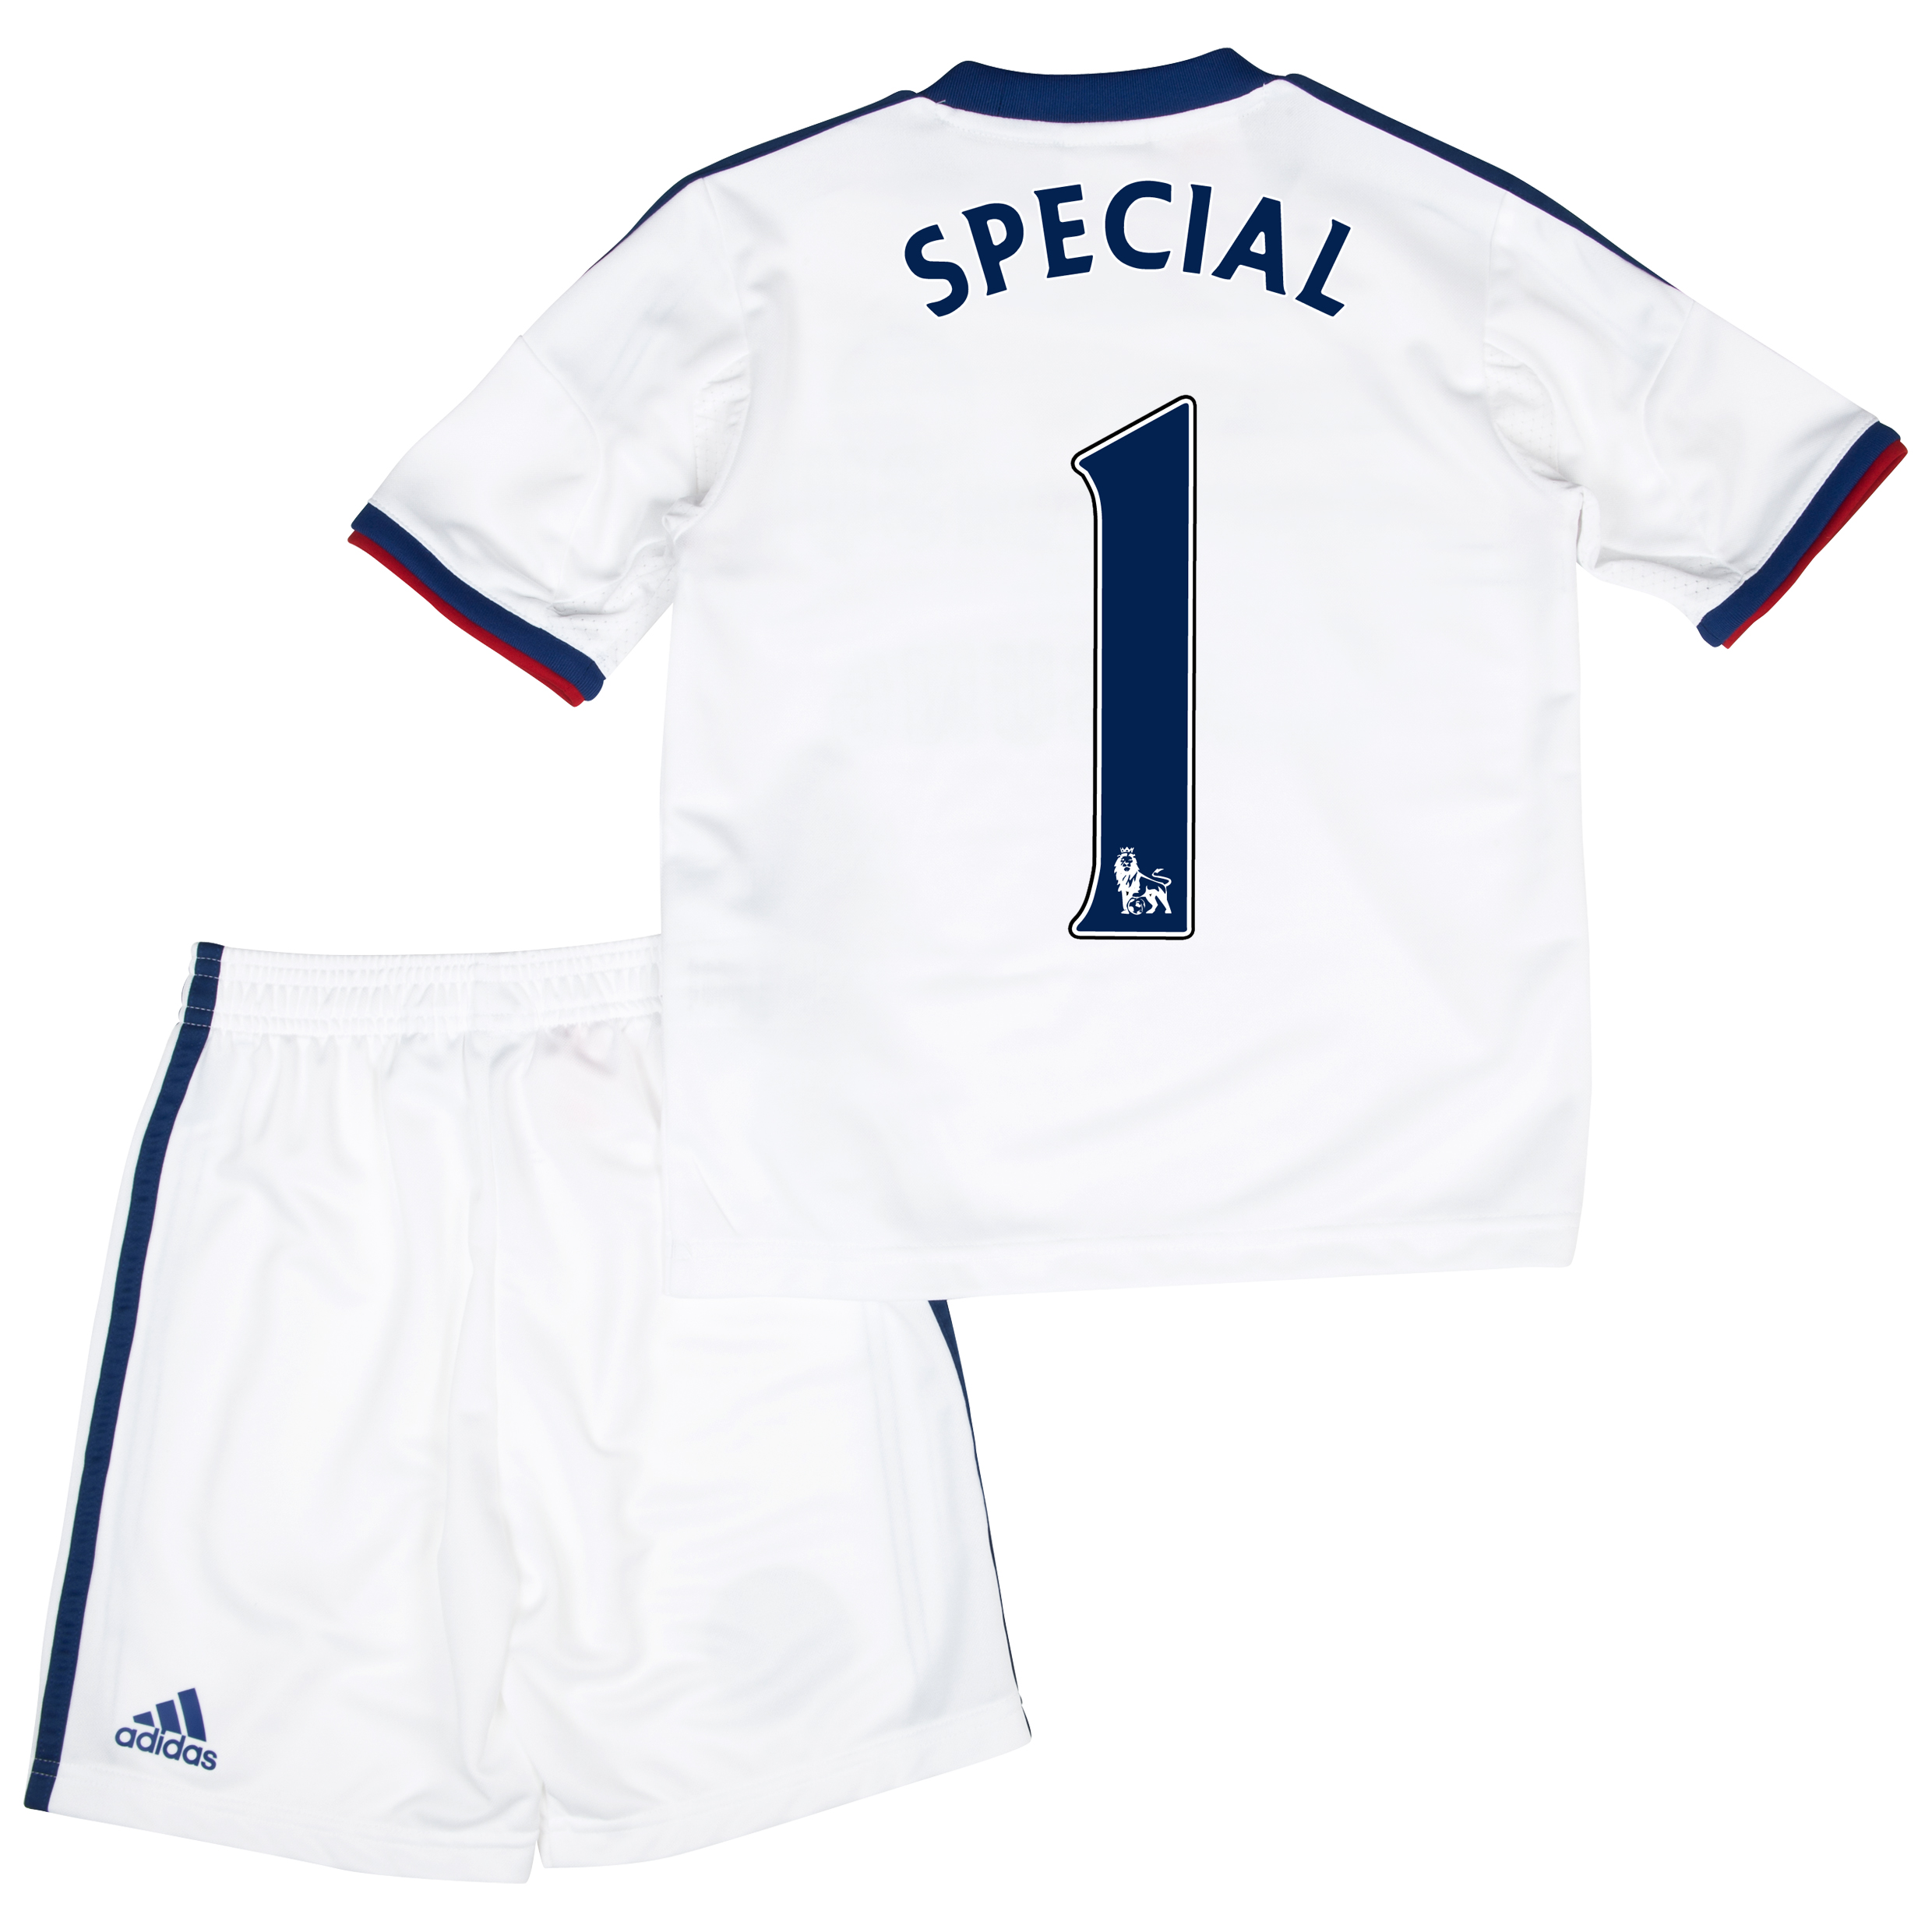 Chelsea Away Mini Kit 2013/14 with Special 1 printing